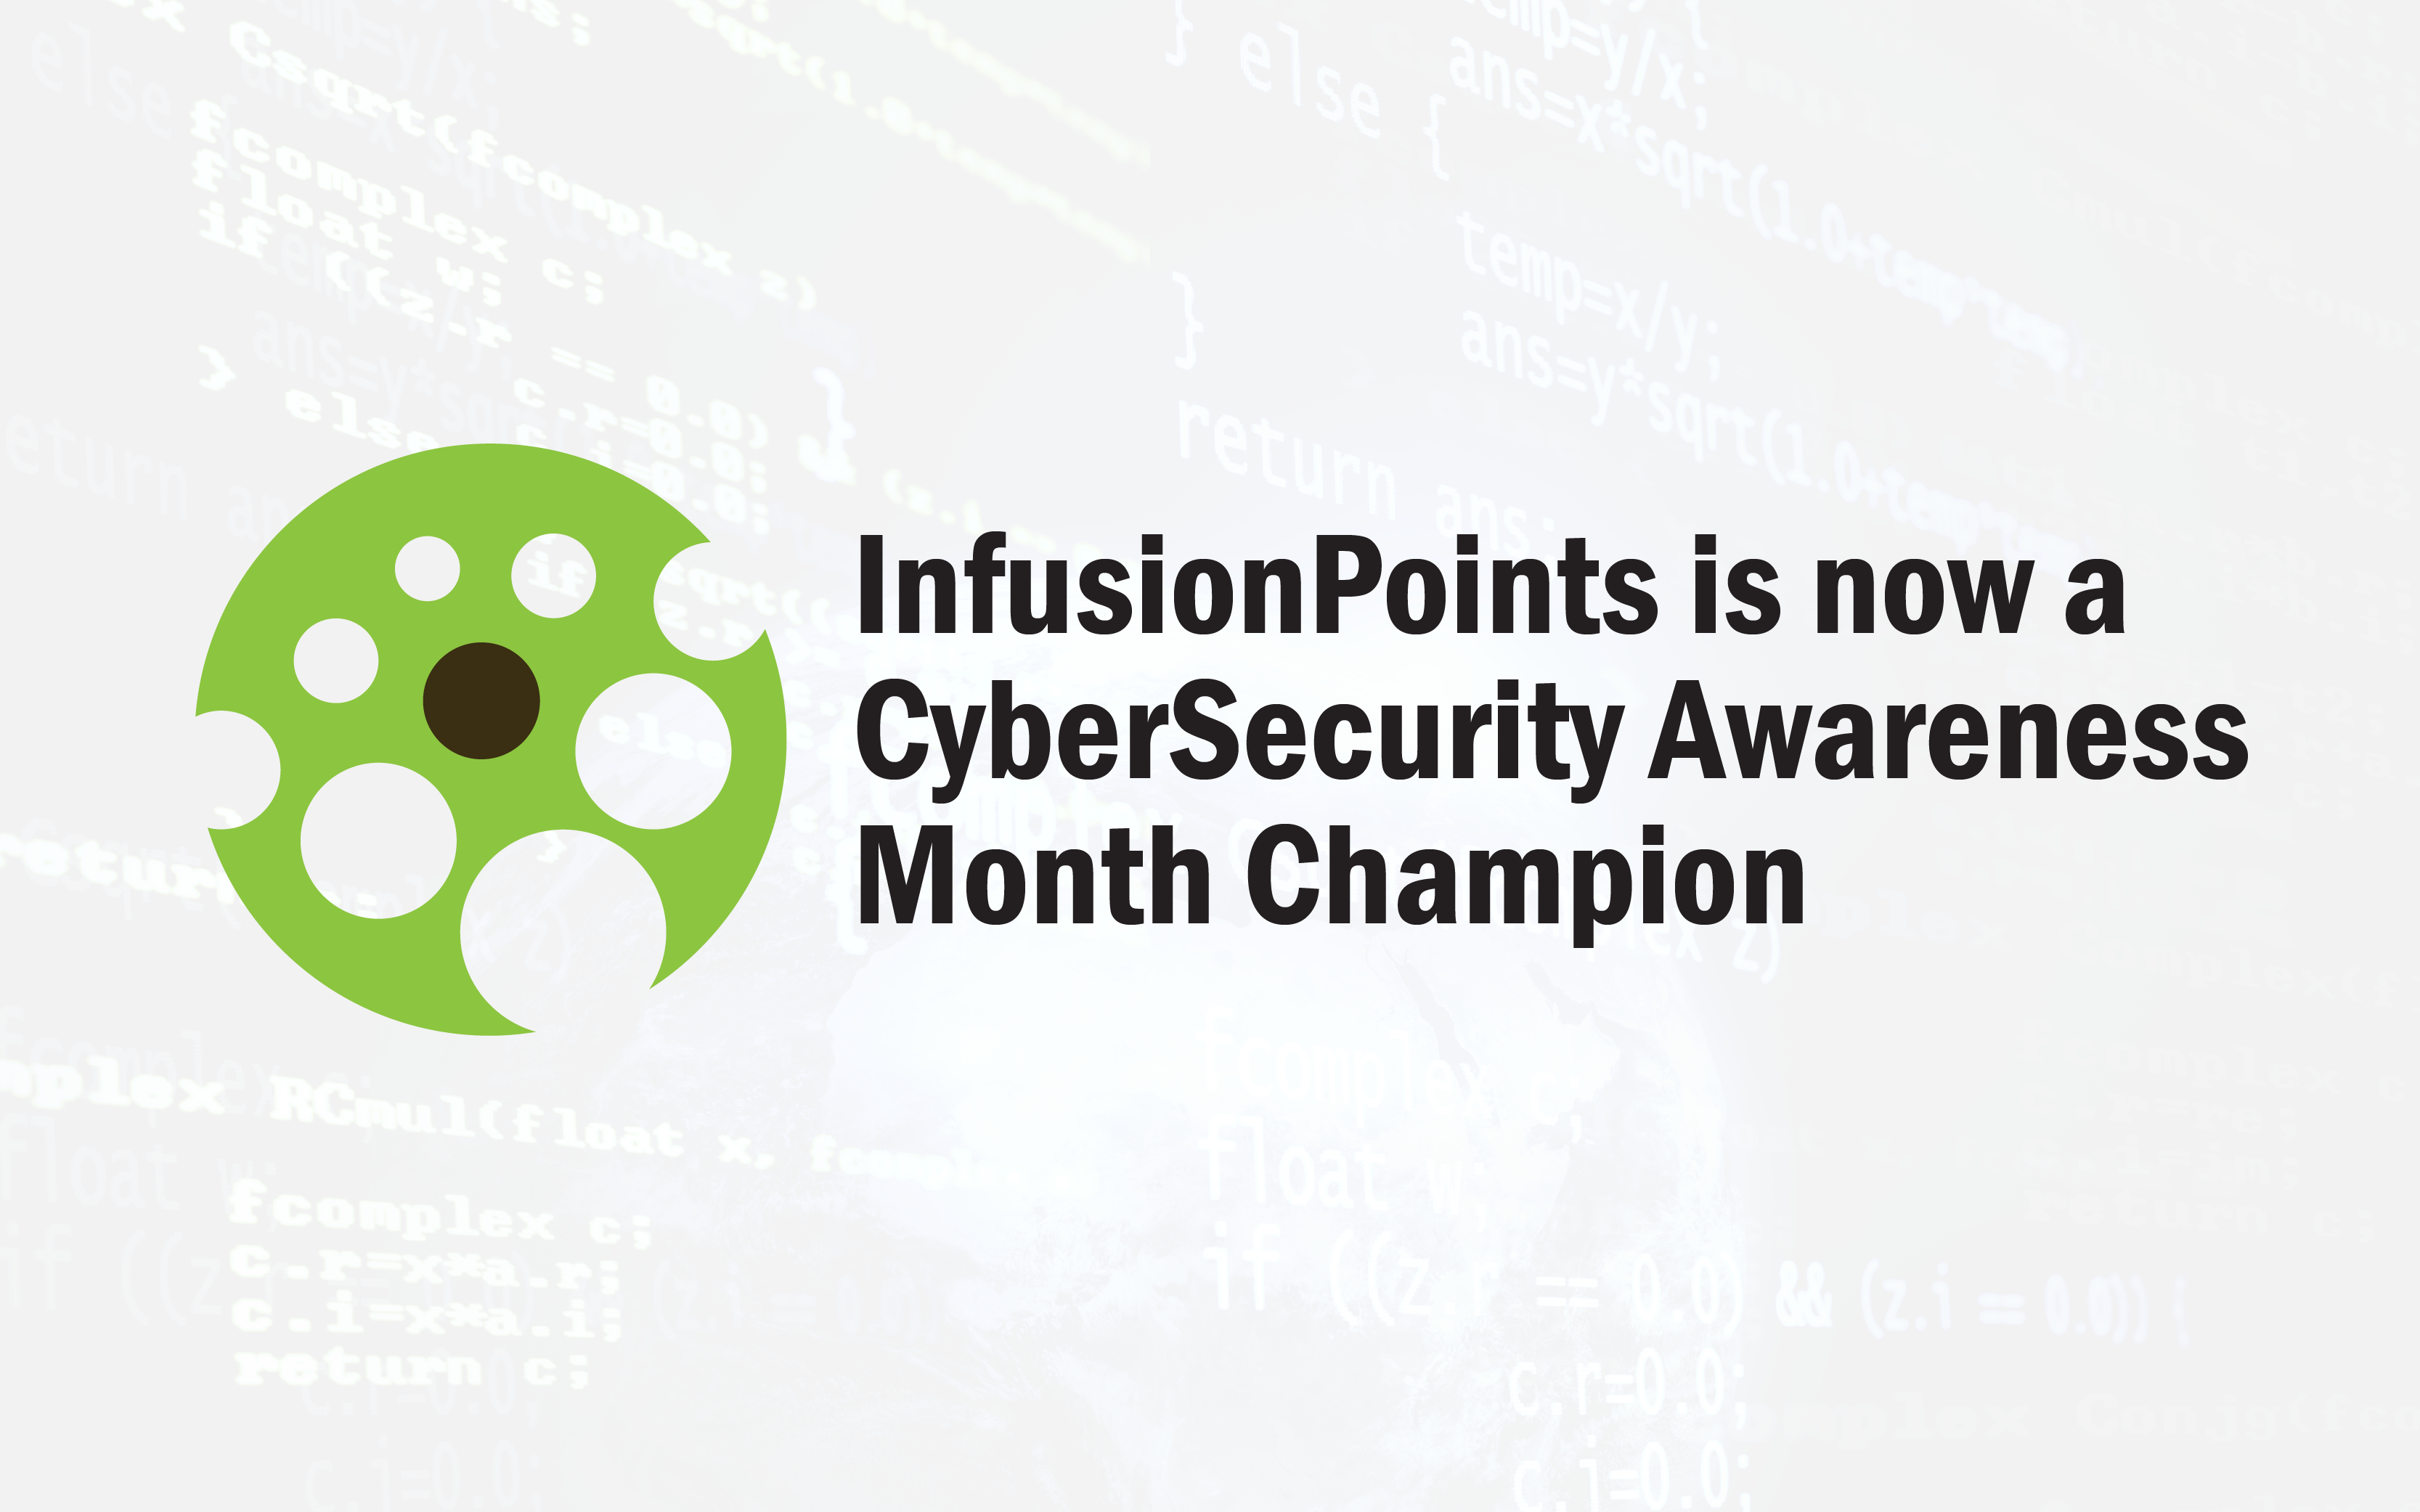 InfusionPoints Pledges to Support National Cybersecurity Awareness Month 2018 as a Champion